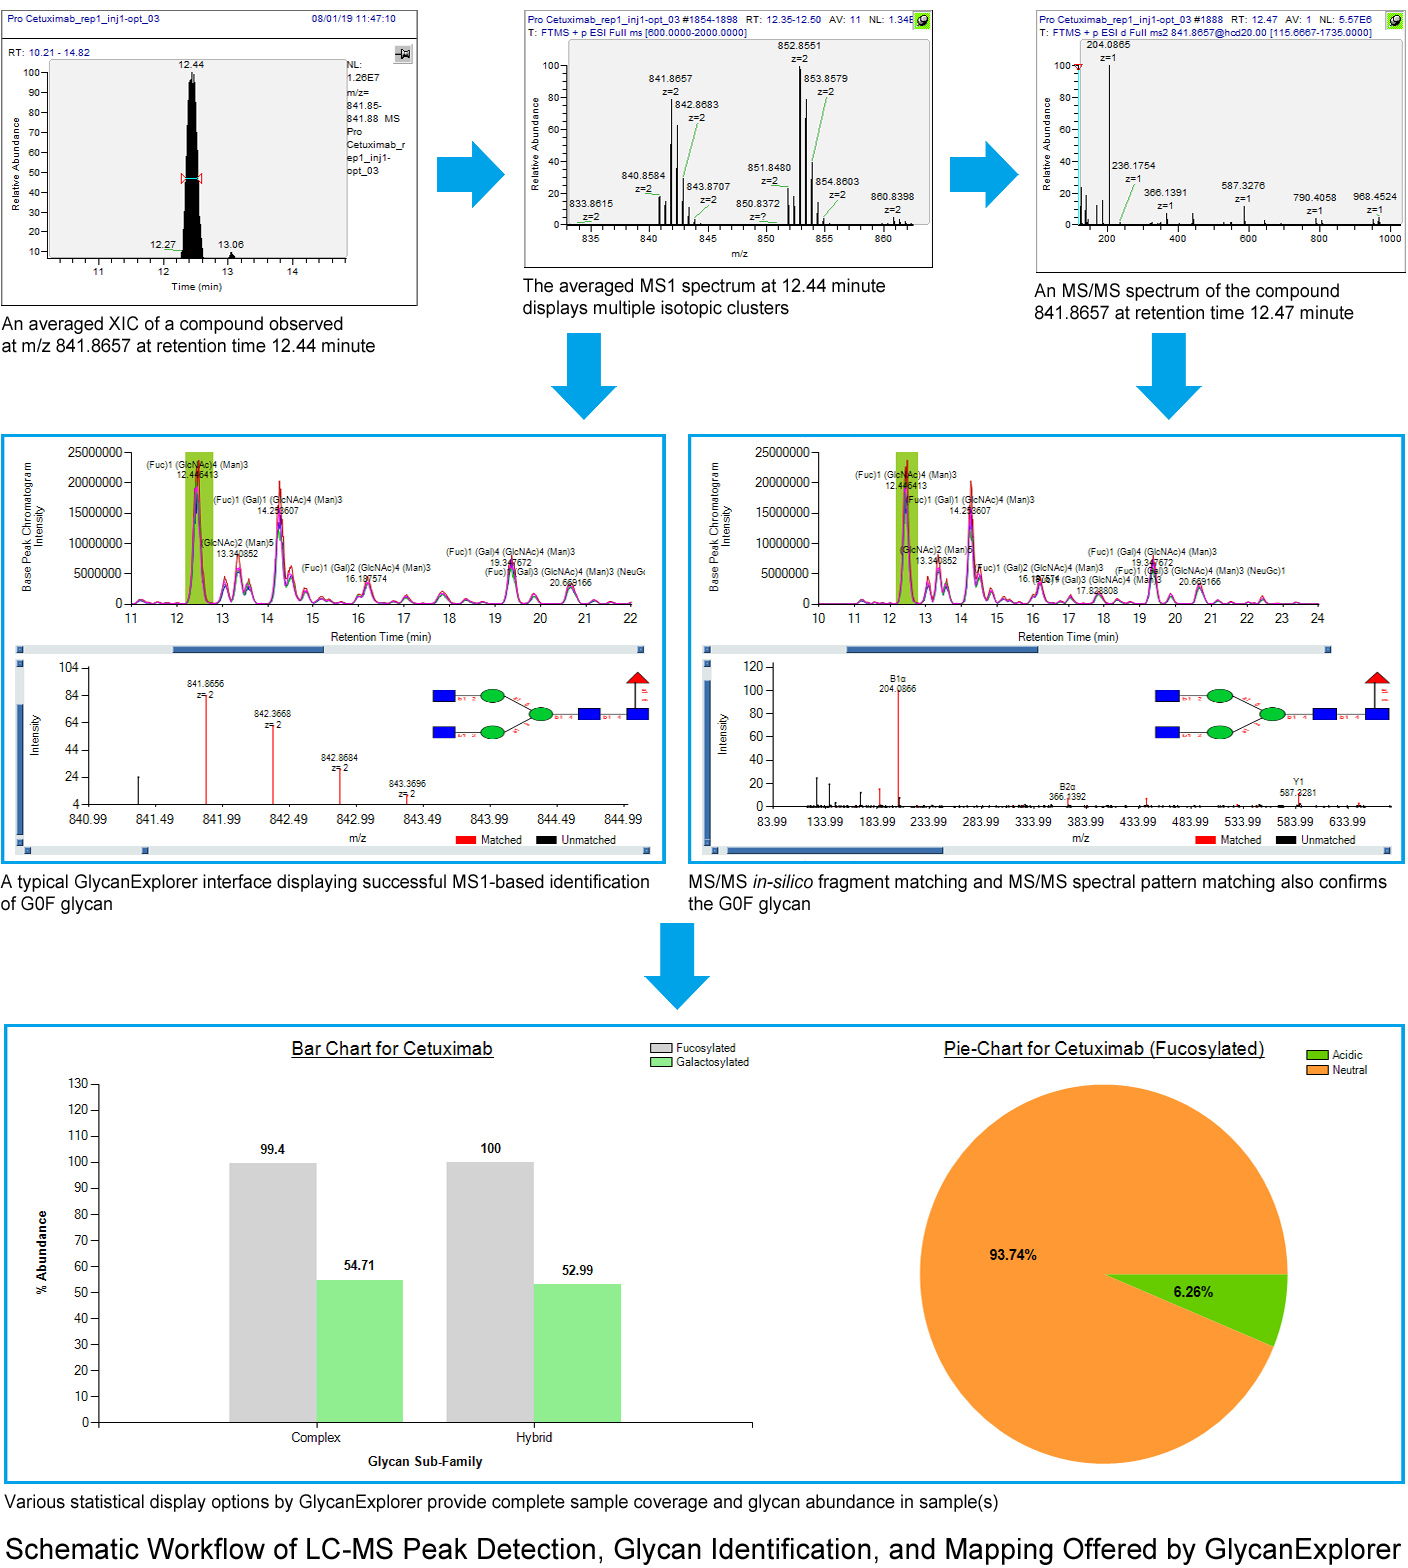 Workflow of LC-MS Peak Detection, Glycan Identification, and Mapping Offered by GlycanExplorer